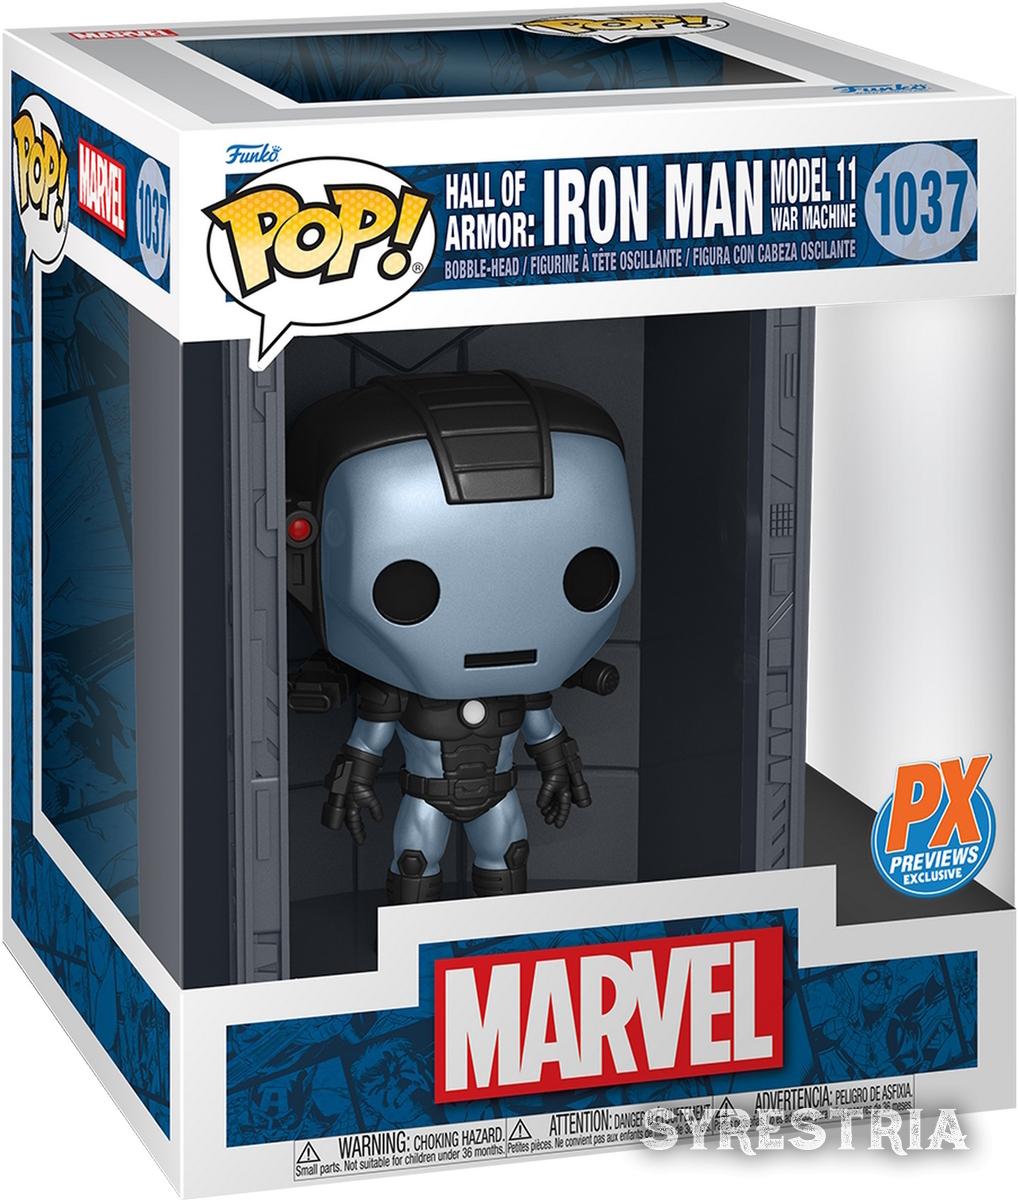 Marvel - Hall Of Armor Iron Man Model 11 War Machine 1037 PX Previews Exclusive - Funko Pop! Deluxe